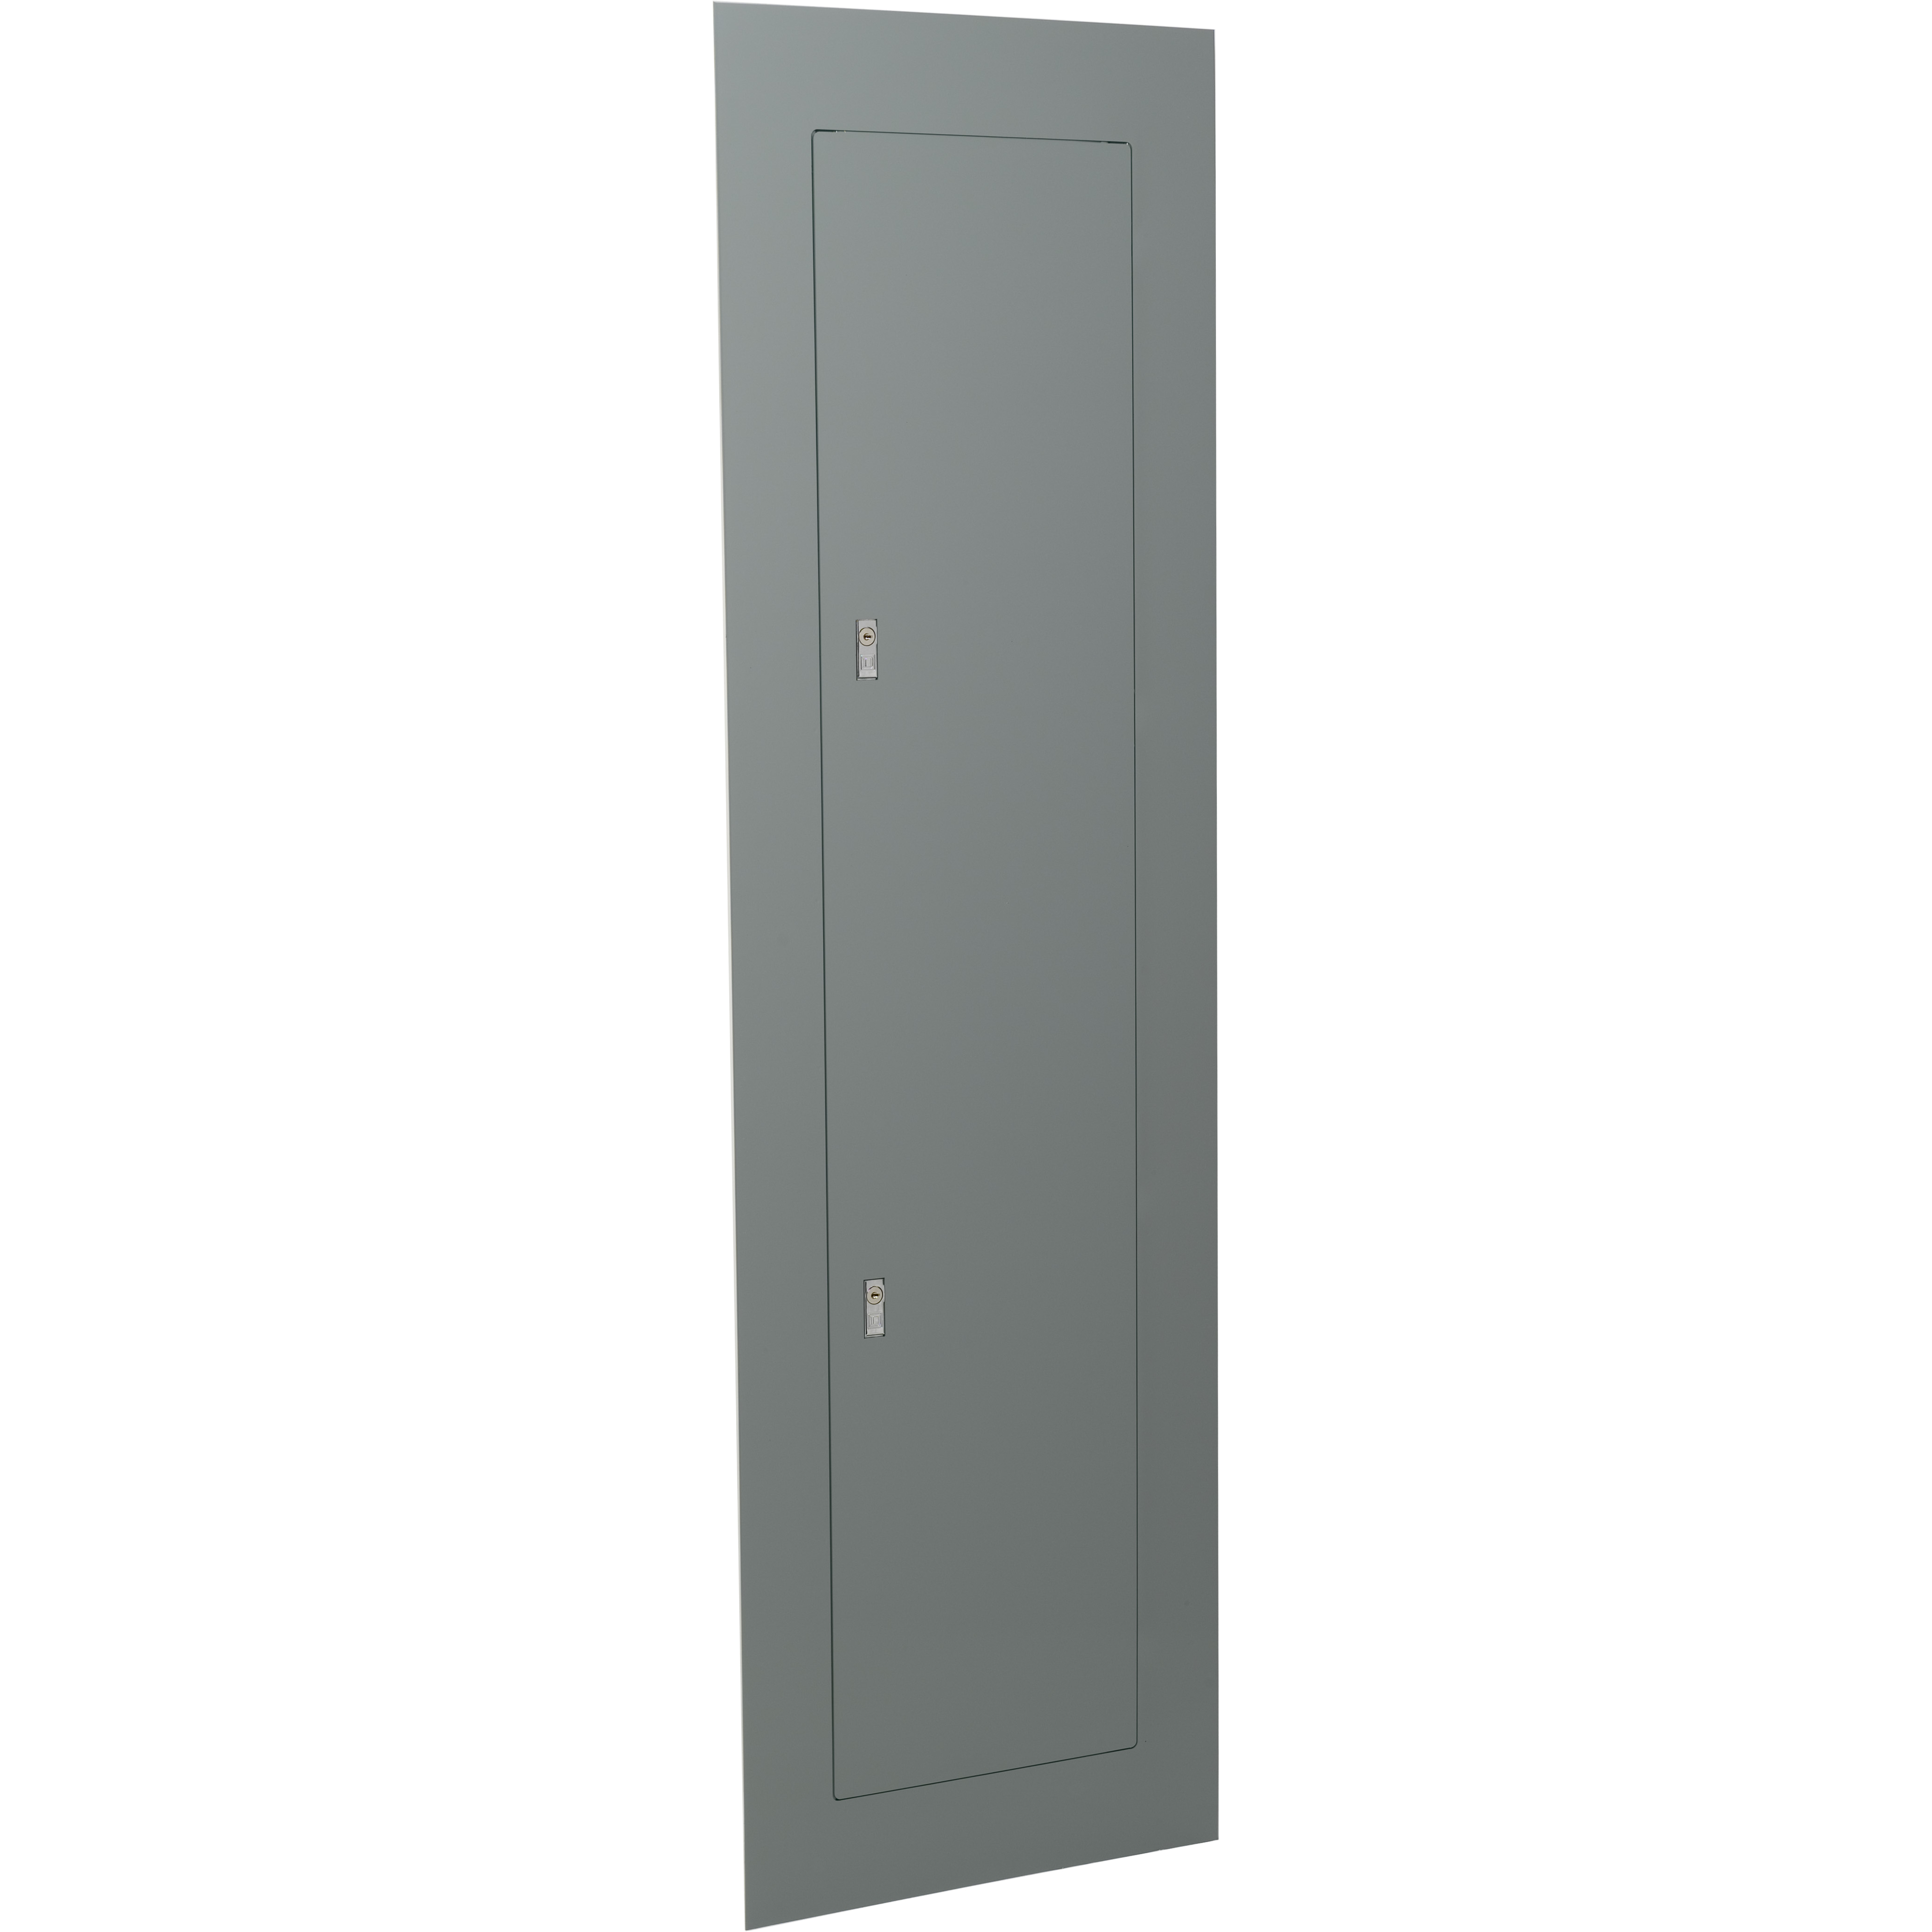 Enclosure Cover, NQNF, Type 1, surface, ventilated, 3 point latch, 20x68in